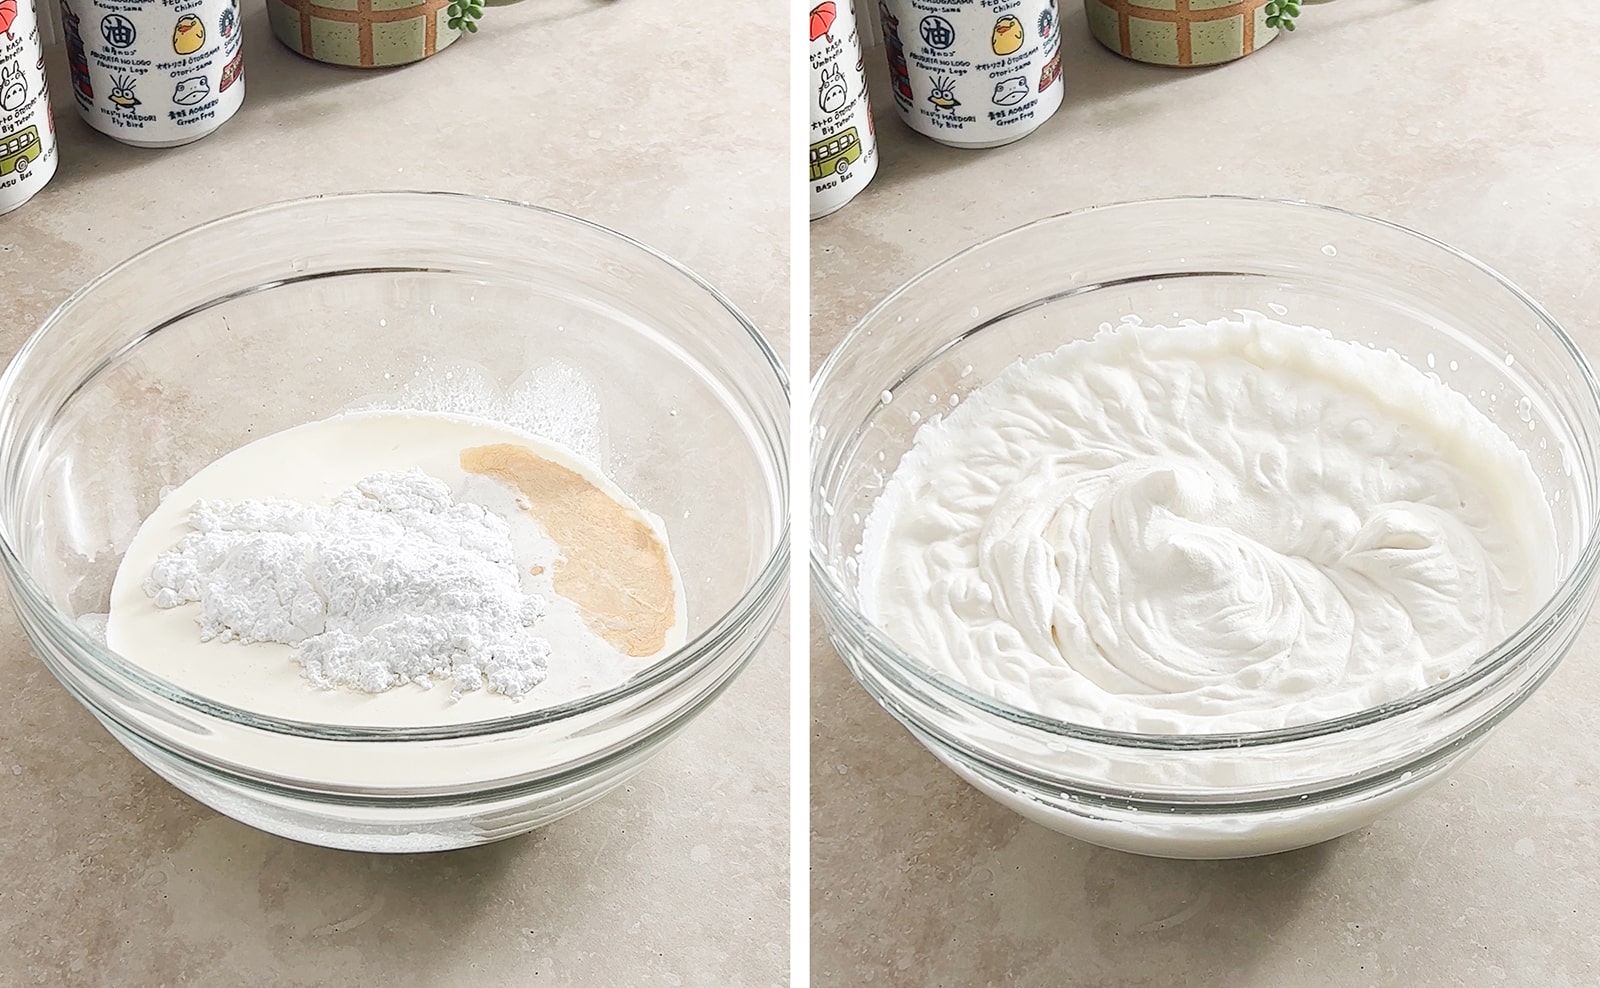 Left to right: bowl of ingredients for whipped cream, whipped cream after being whipped.